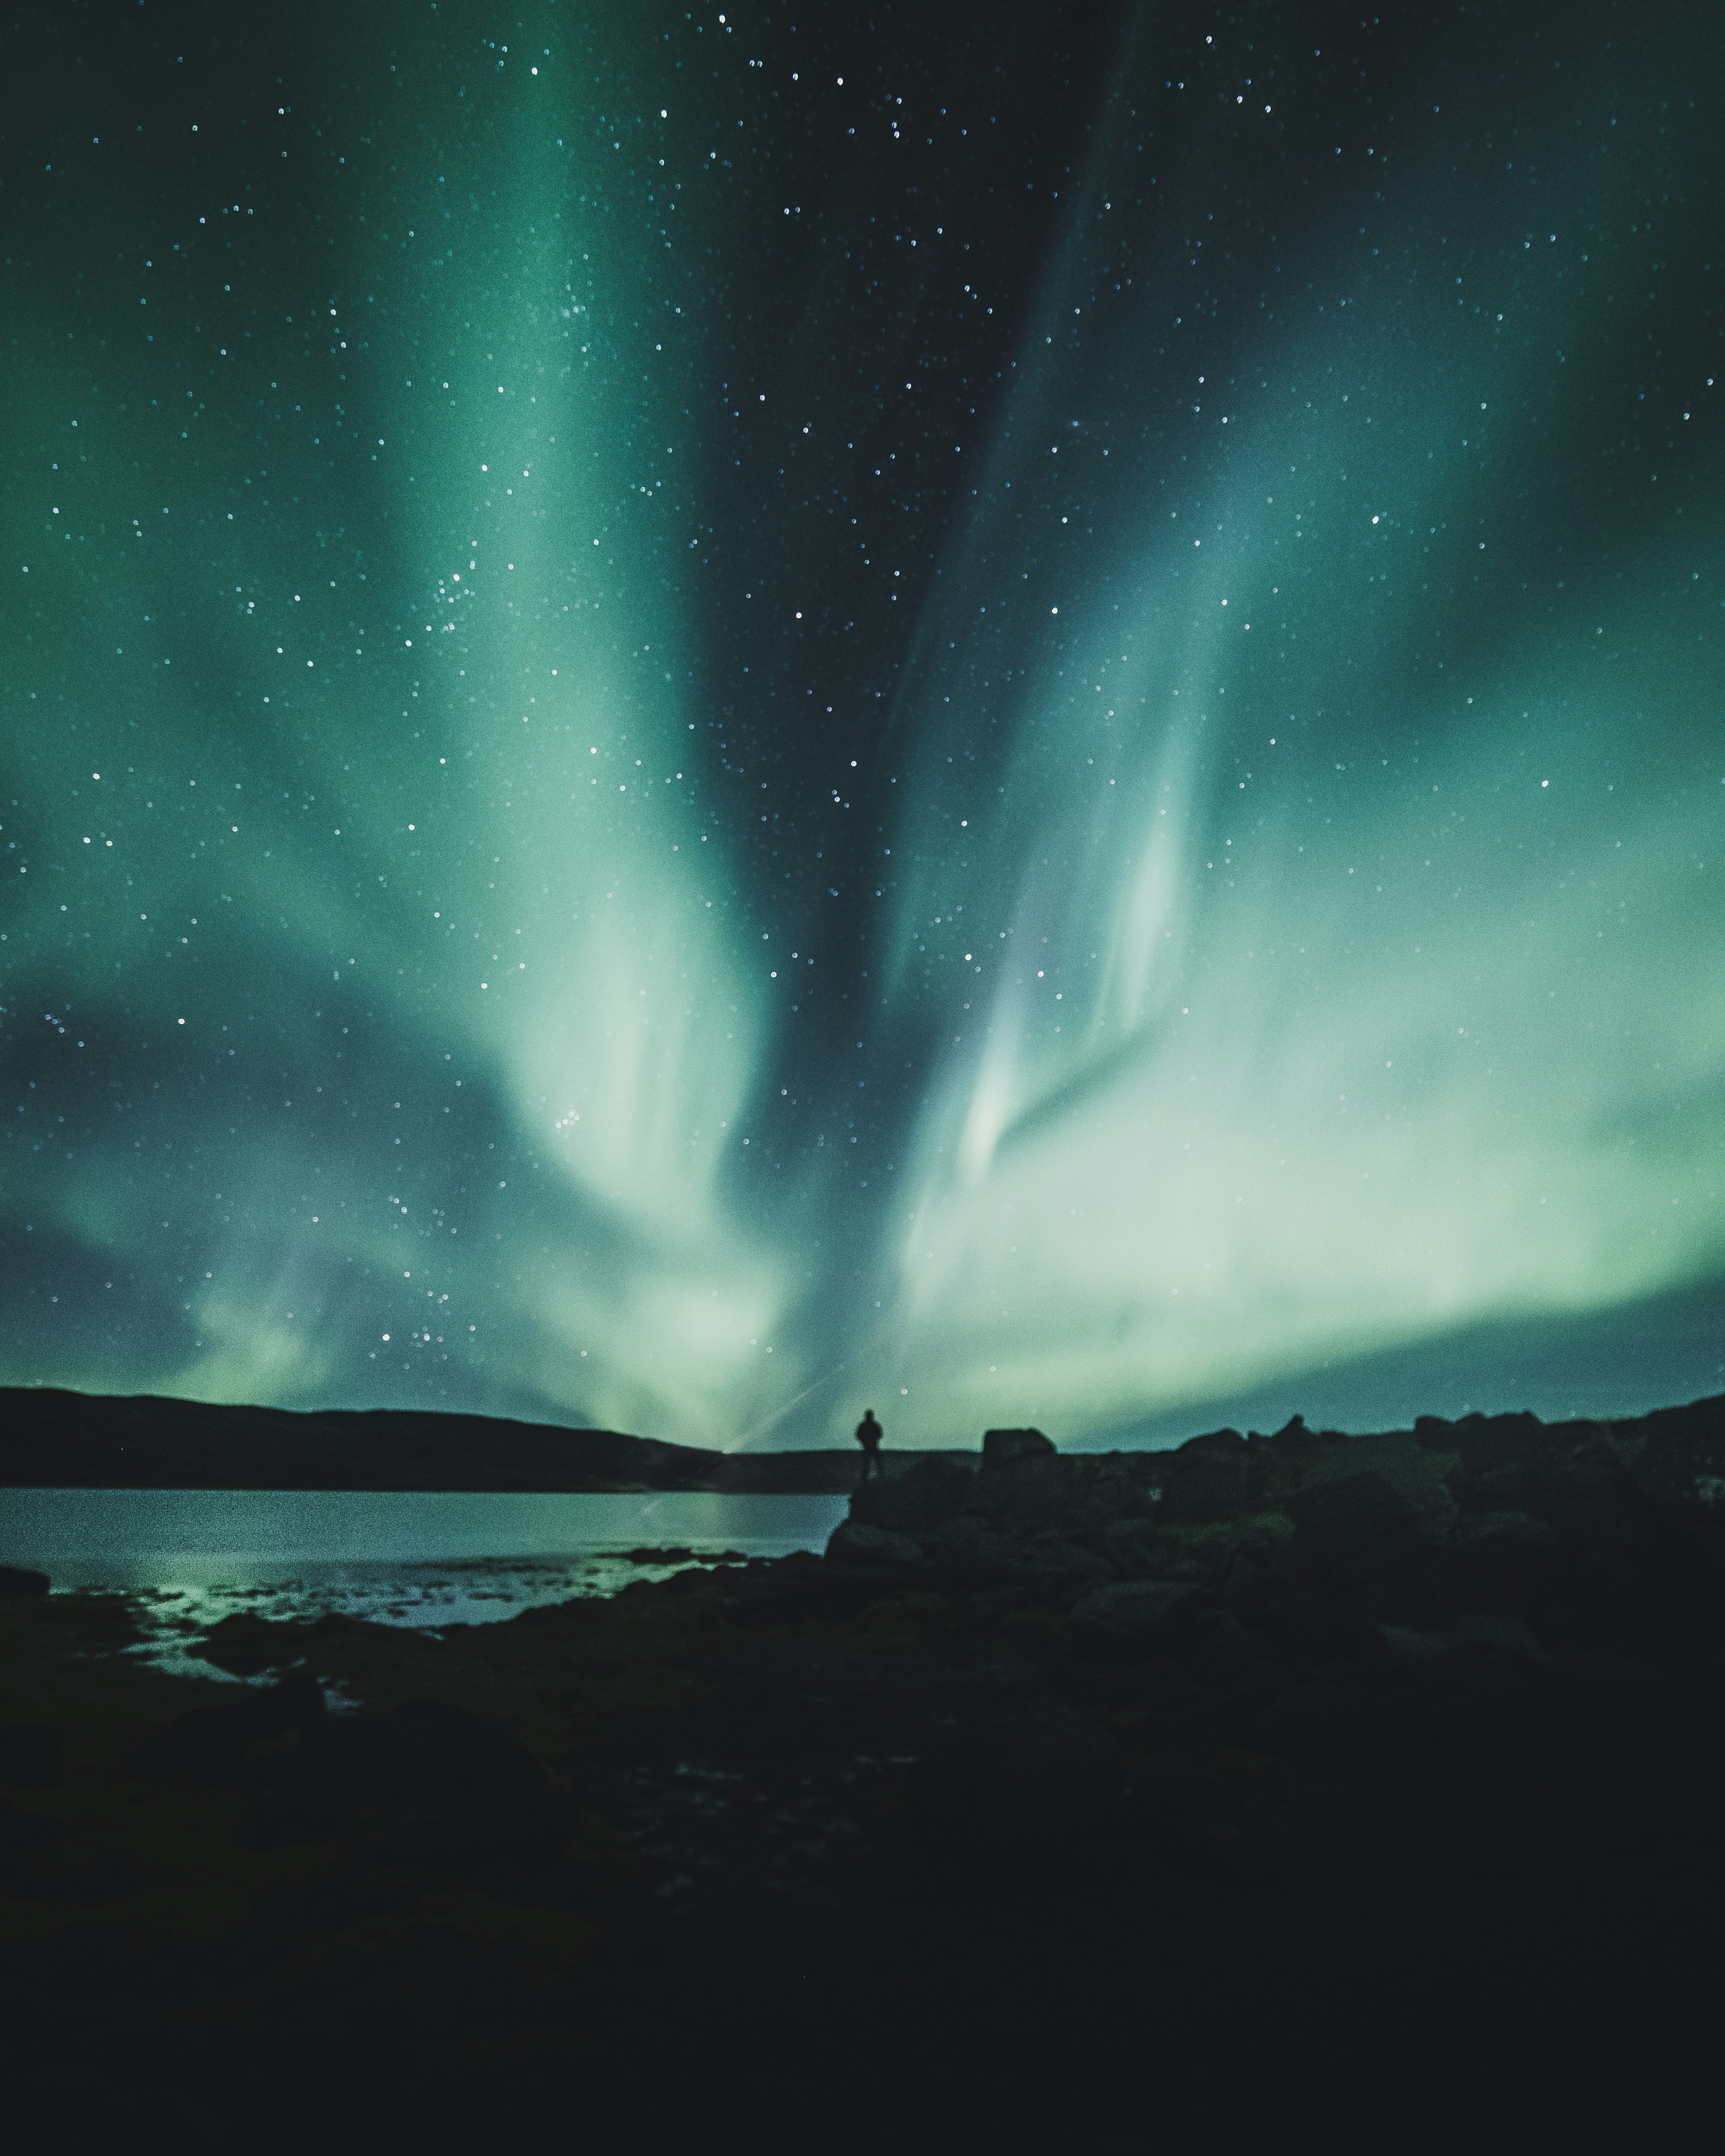 Capturing the shifting aurora in the shape of wings, framing my fellow photographer perfectly - Check out my Instagram - @WithLuke⠀ If you use my images and want to support me as a photographer any donations however small would be appreciated! Paypal - https://bit.ly/3dX4x1Y